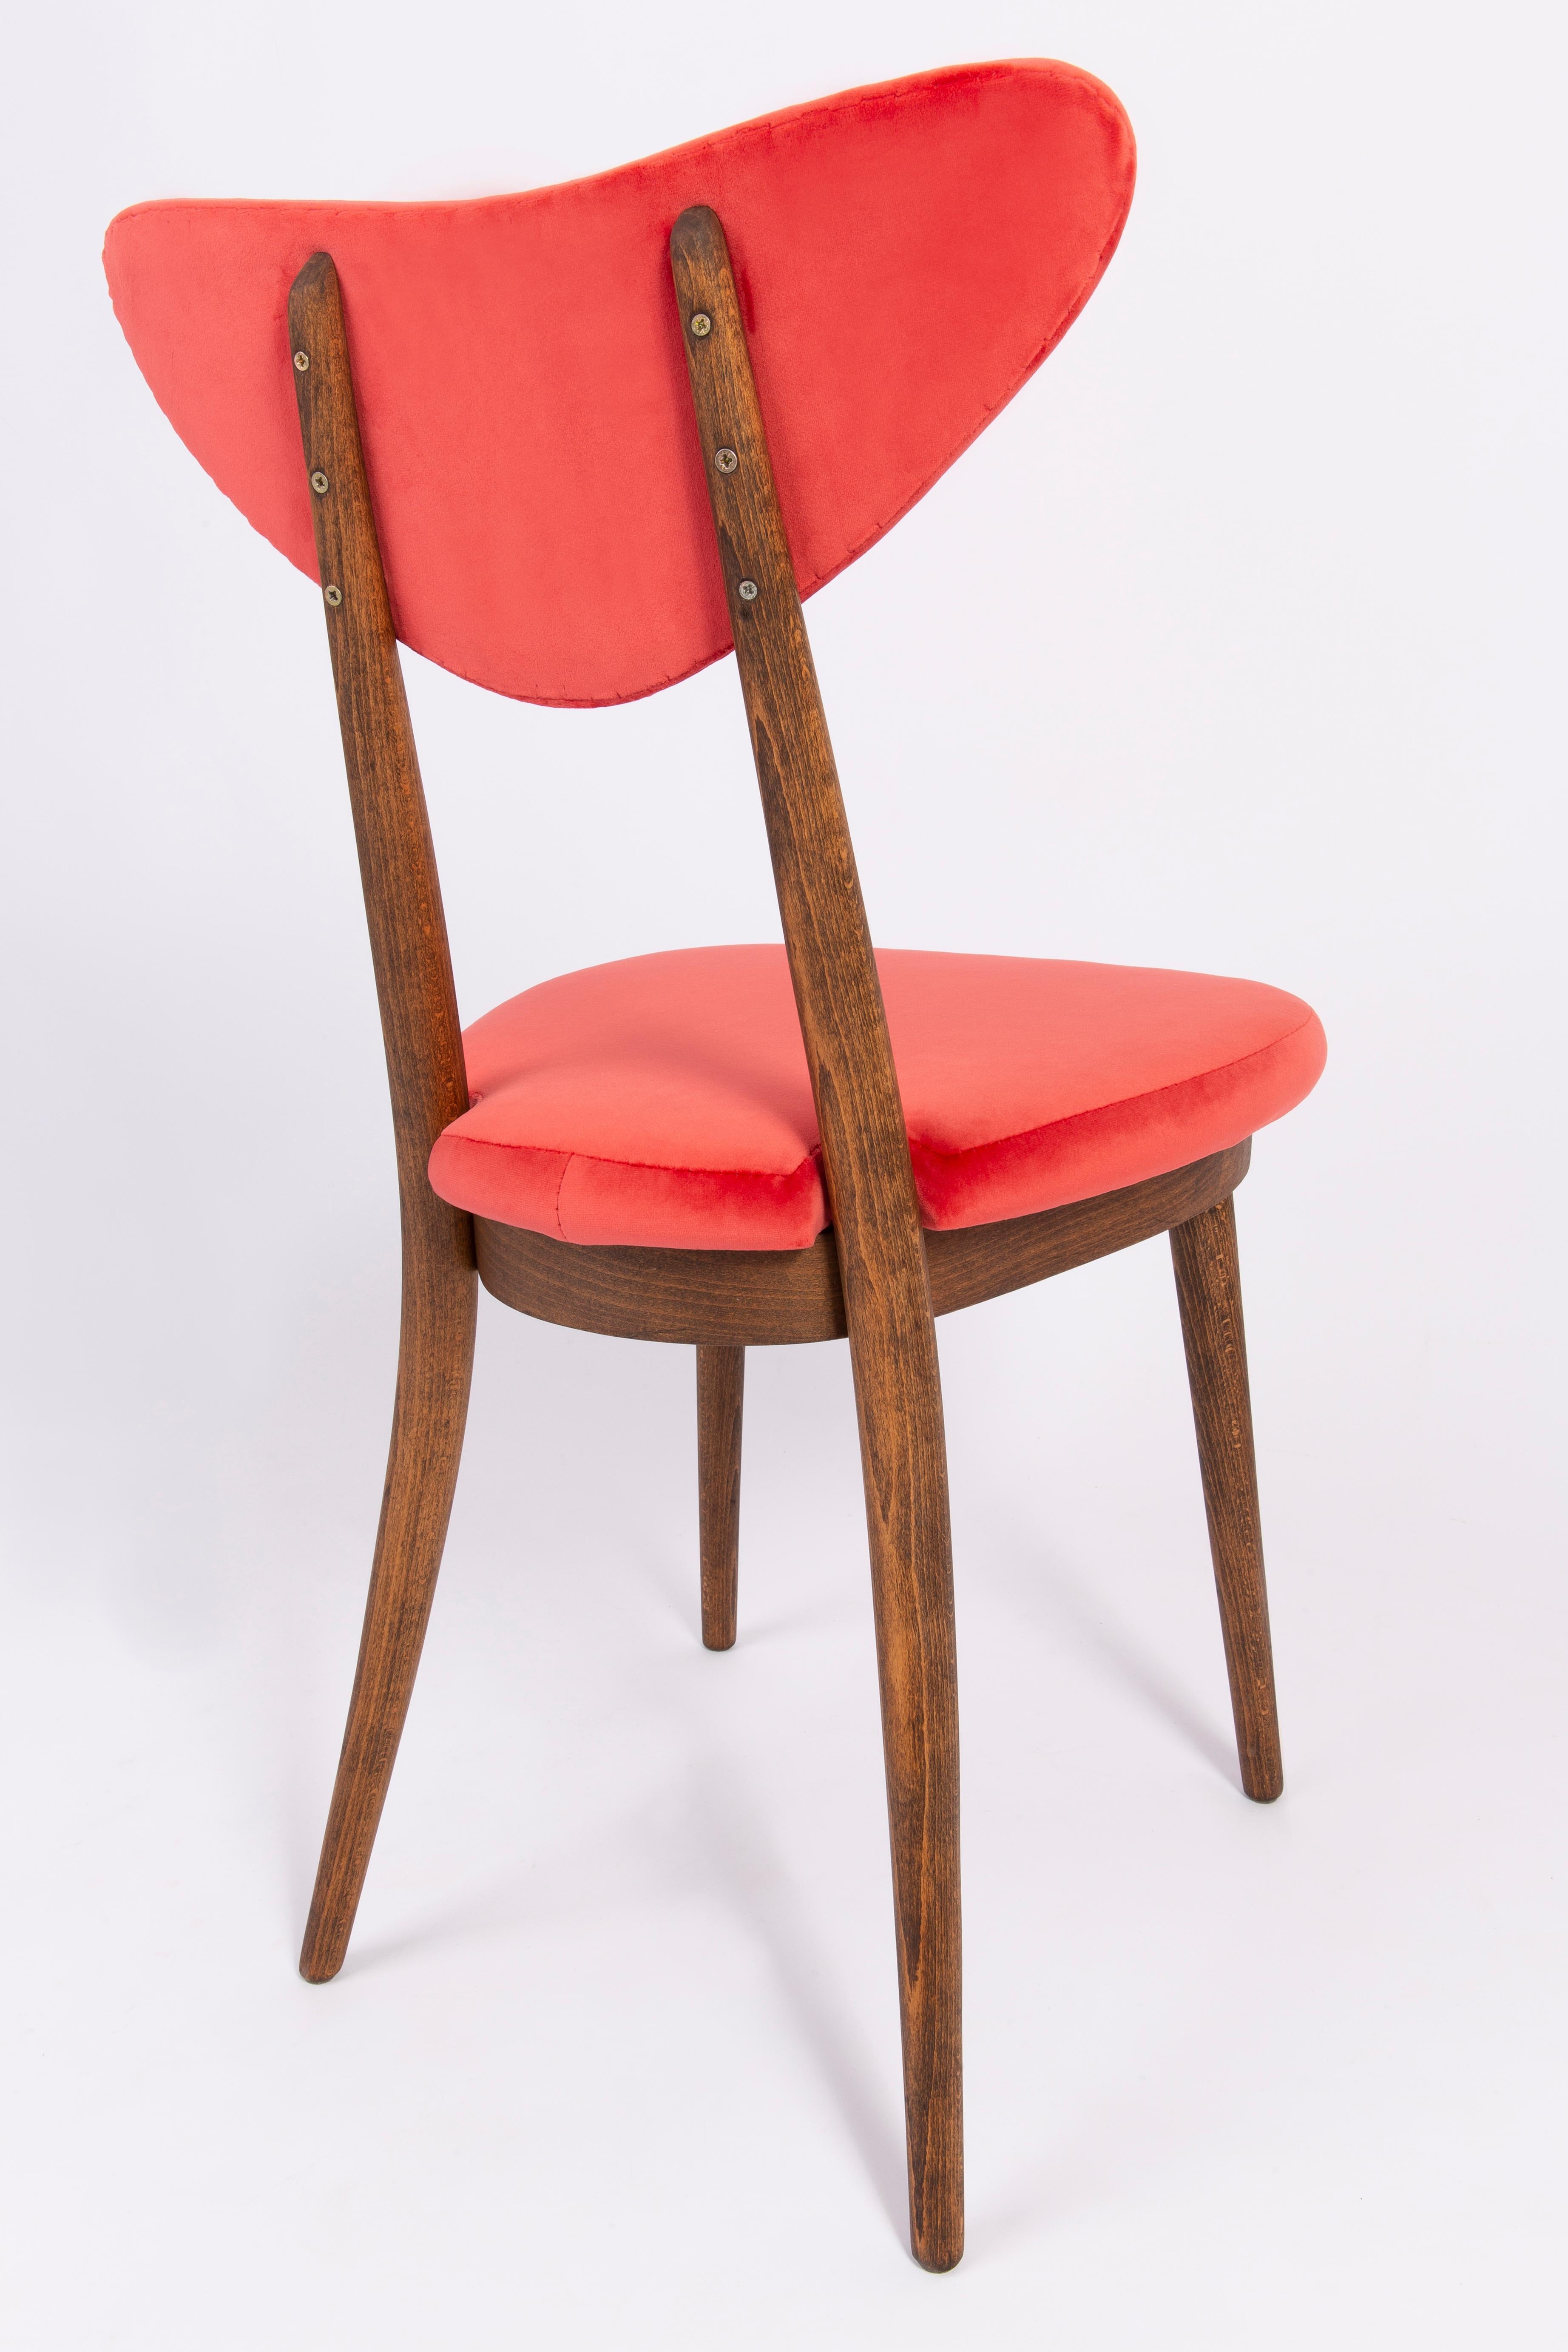 Set of Two Red Heart Chairs, Poland, 1960s For Sale 2